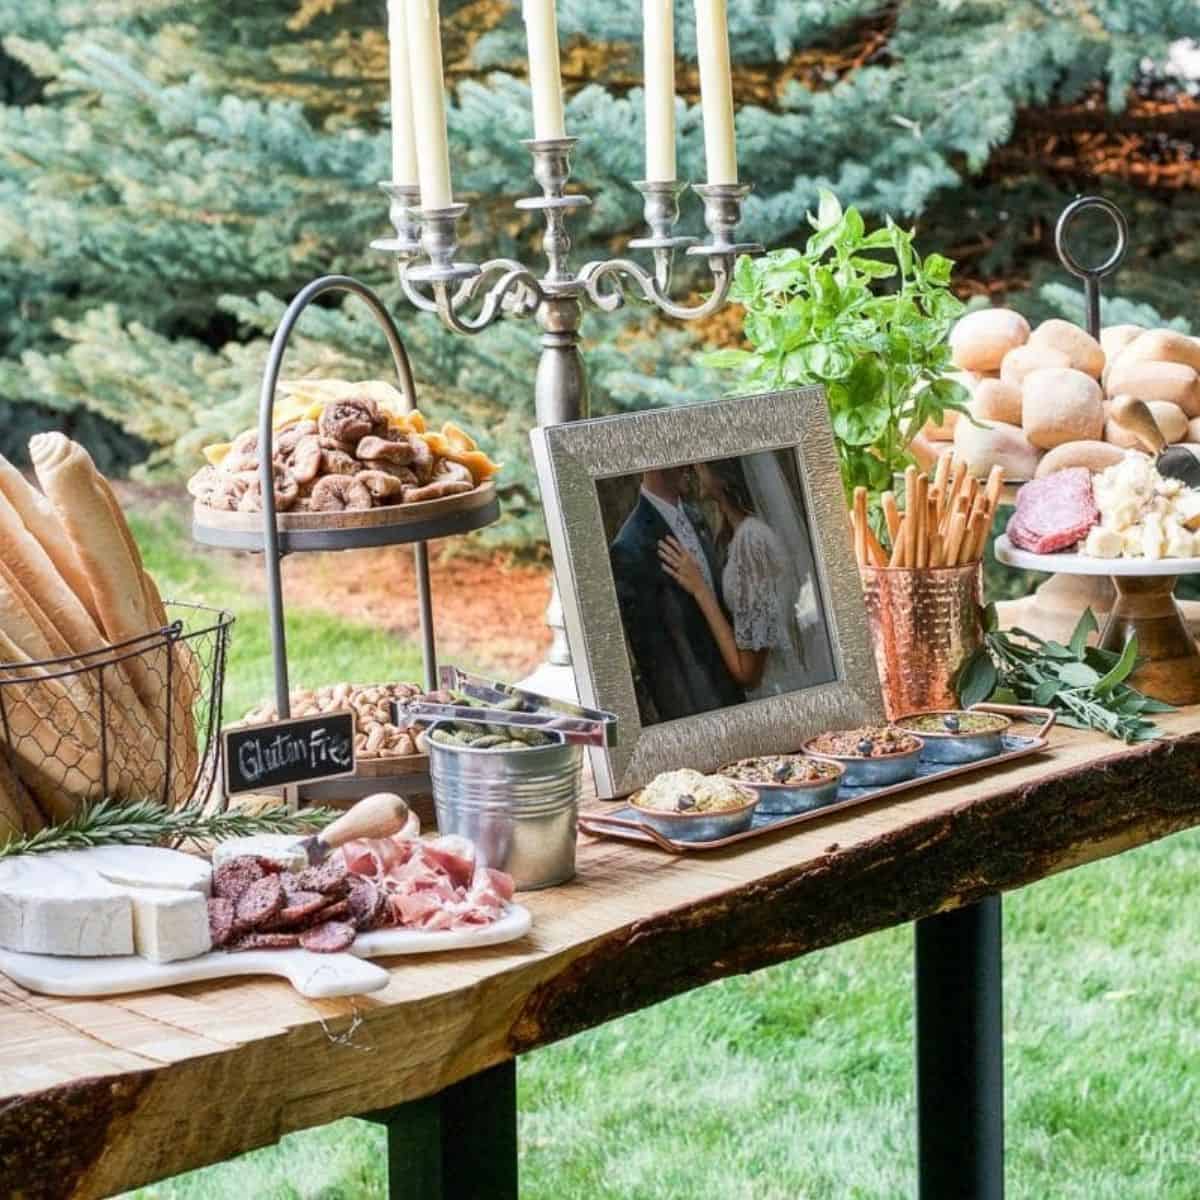 Charcuterie table at a wedding